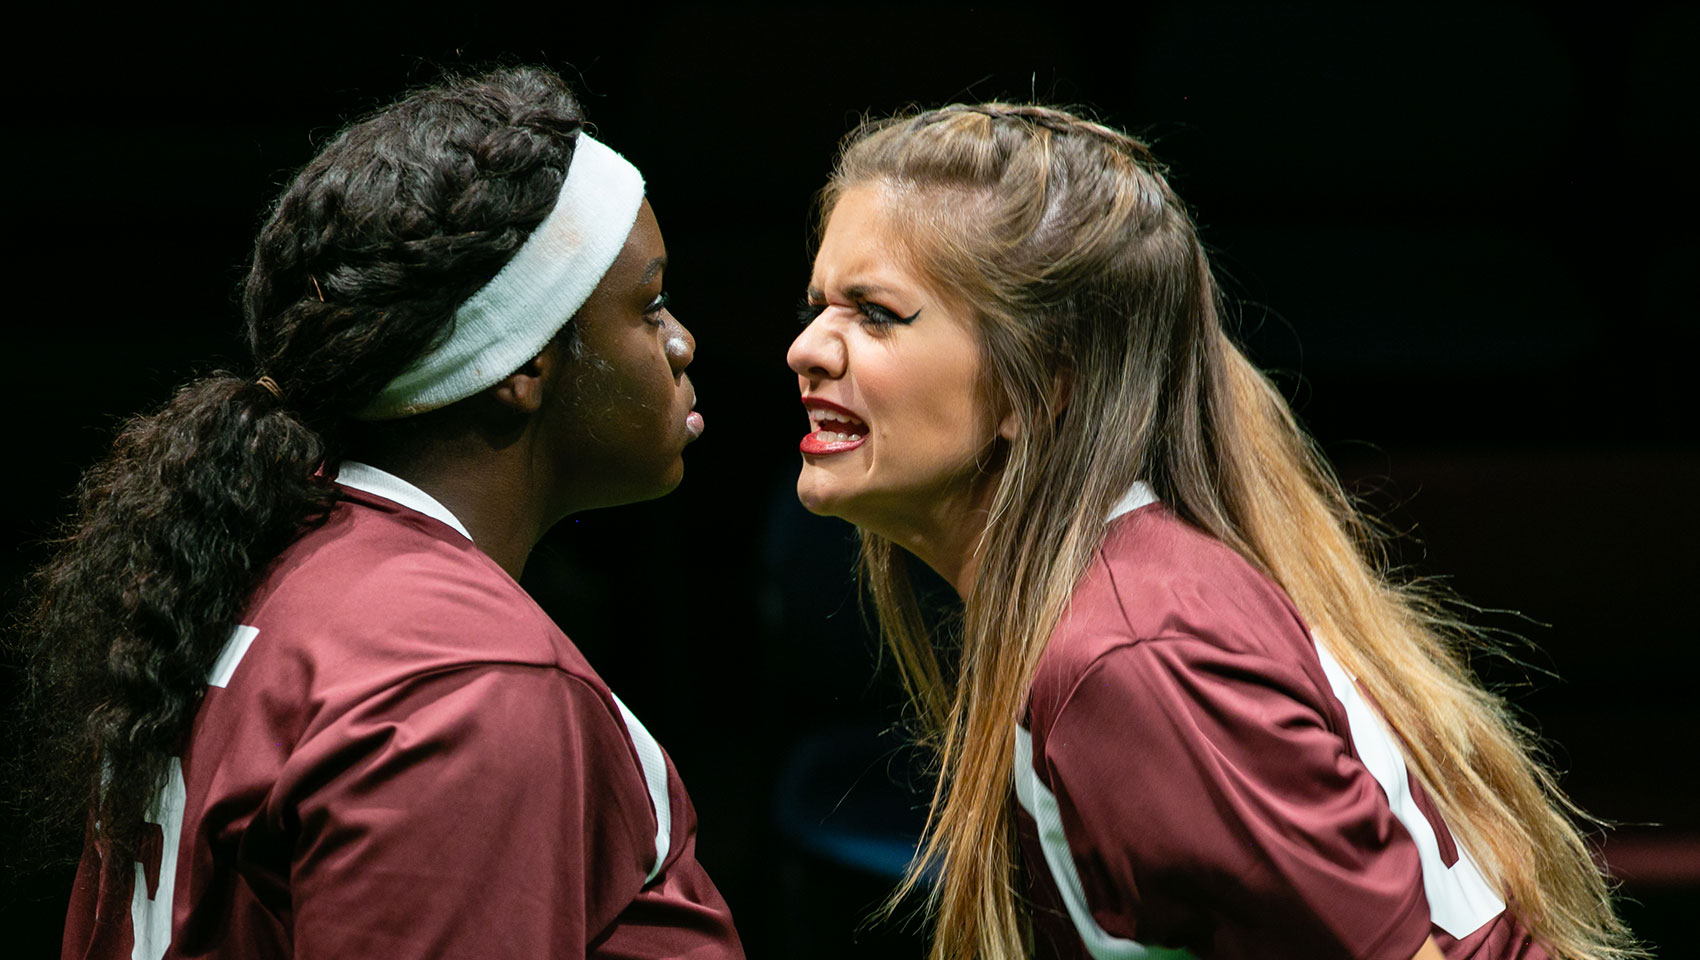 A tense scene between two members of the same girls' scocer team. One of them, a Black girl, stares ahead stone-faced, while the other, a white girl, gets in her  face with a grimacing expression. 